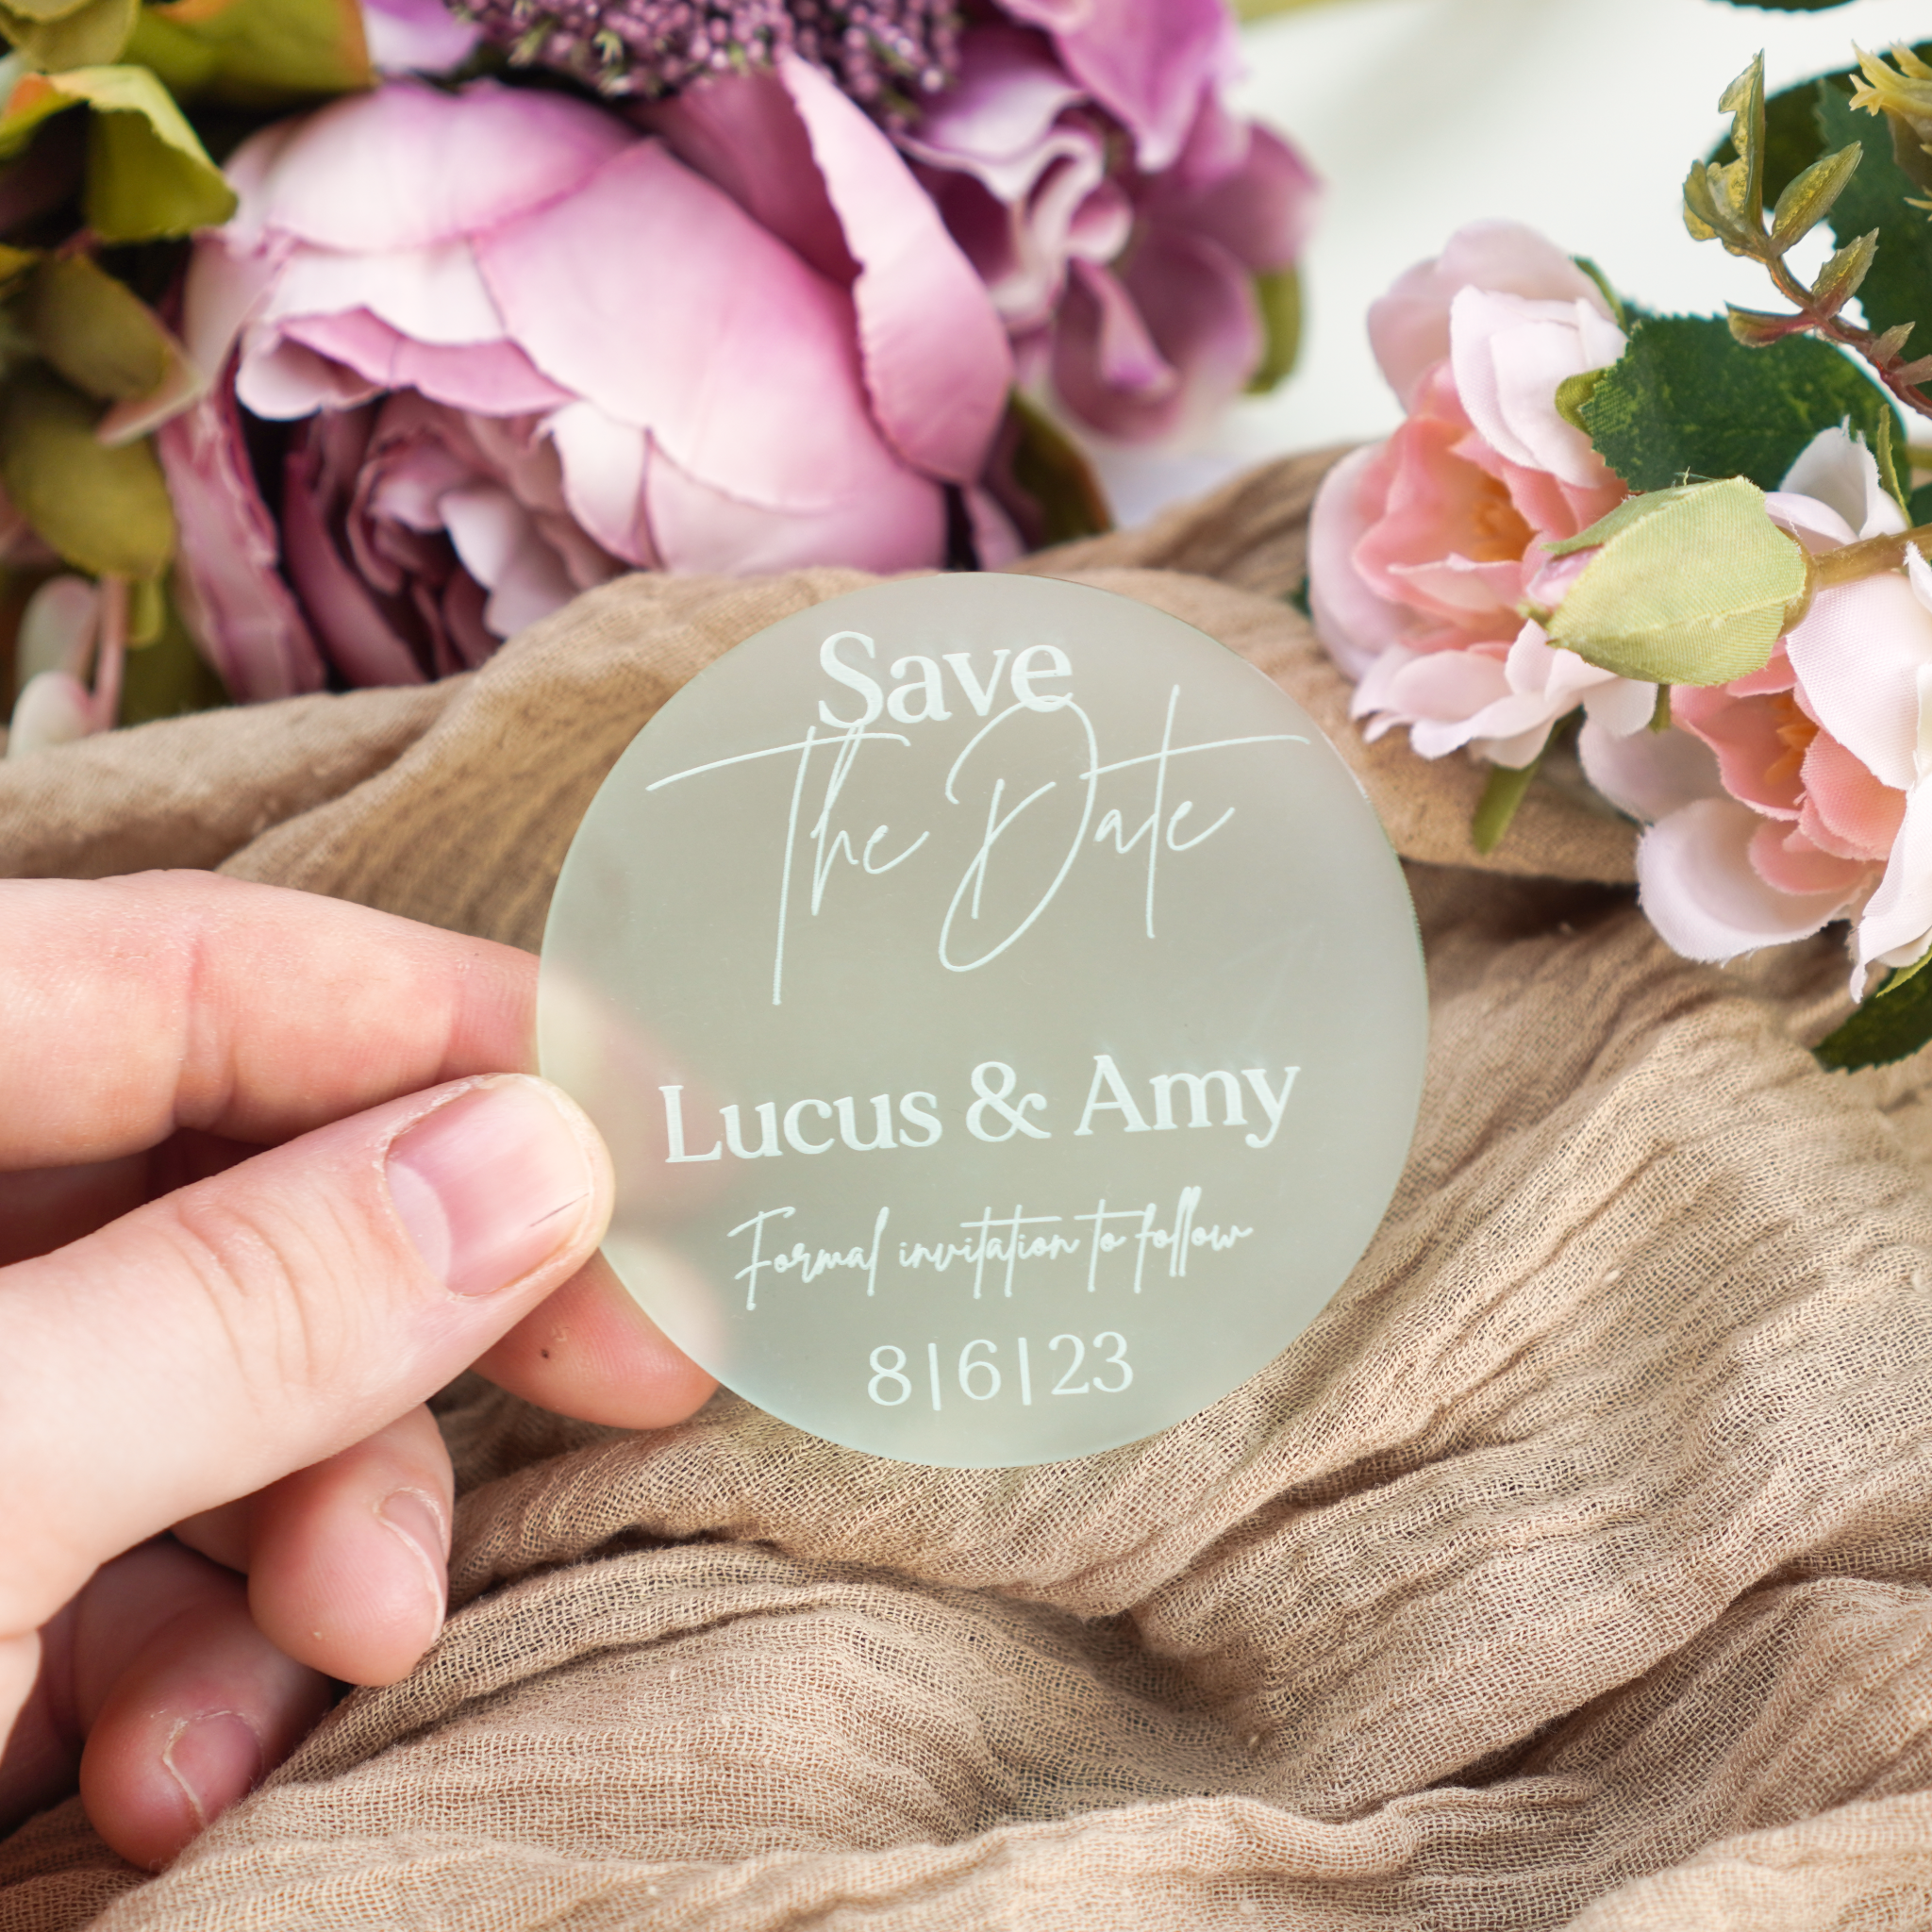 Save The Date cards